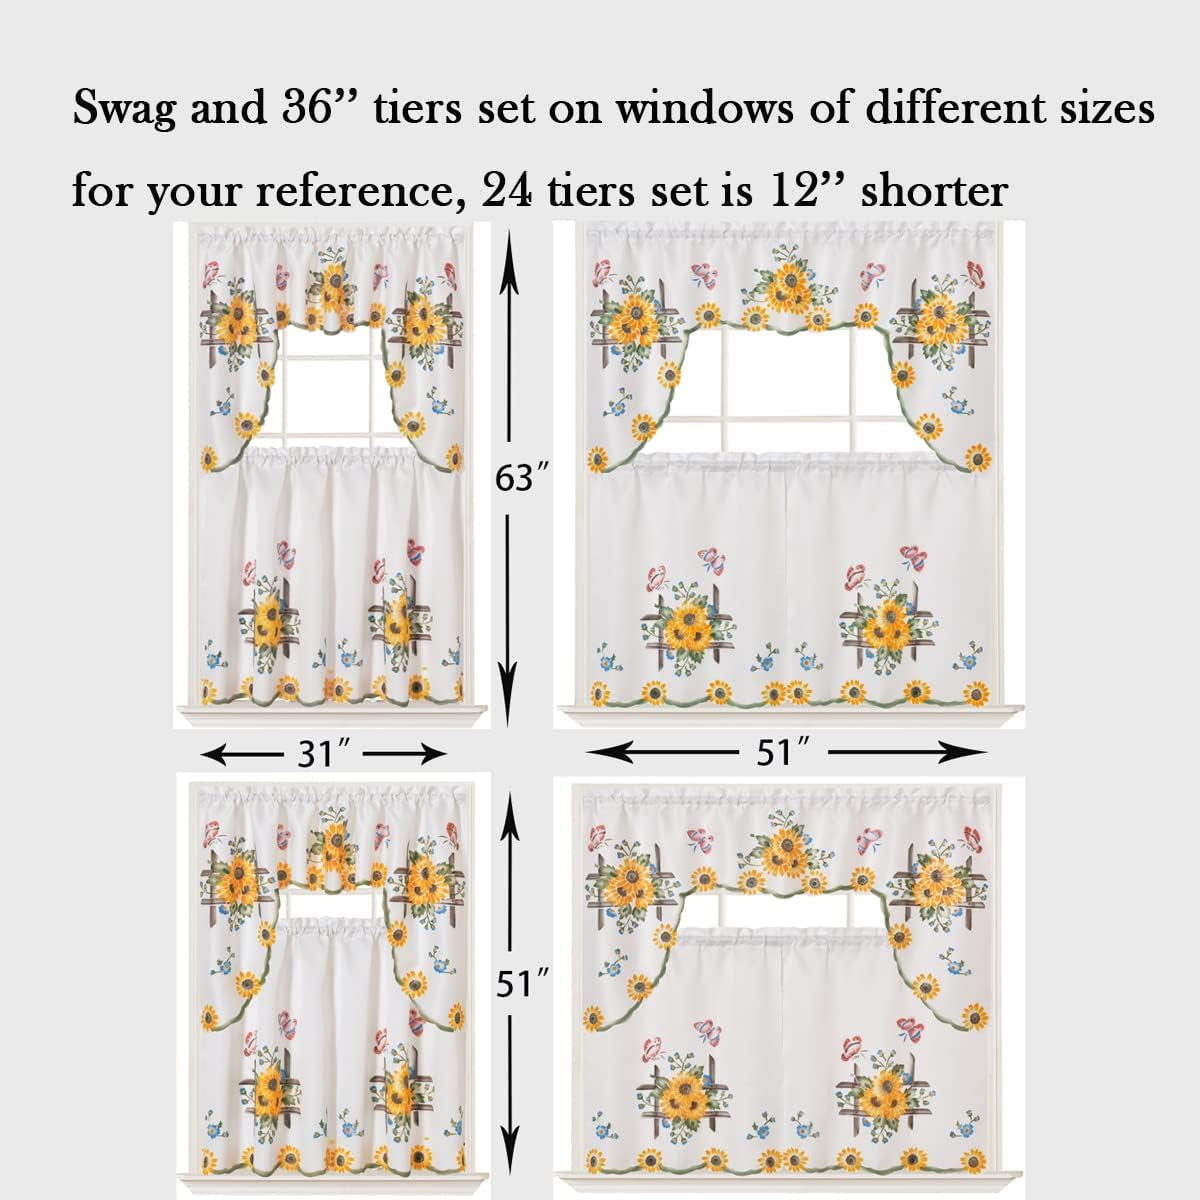 GOHD 3Pcs Farmhouse Kitchen Cafe Curtain Set Air Brushed by Hand of Sunflower and Butterfly Design on Thick Satin Fabric (Swag and 36 Inches Tiers Set)